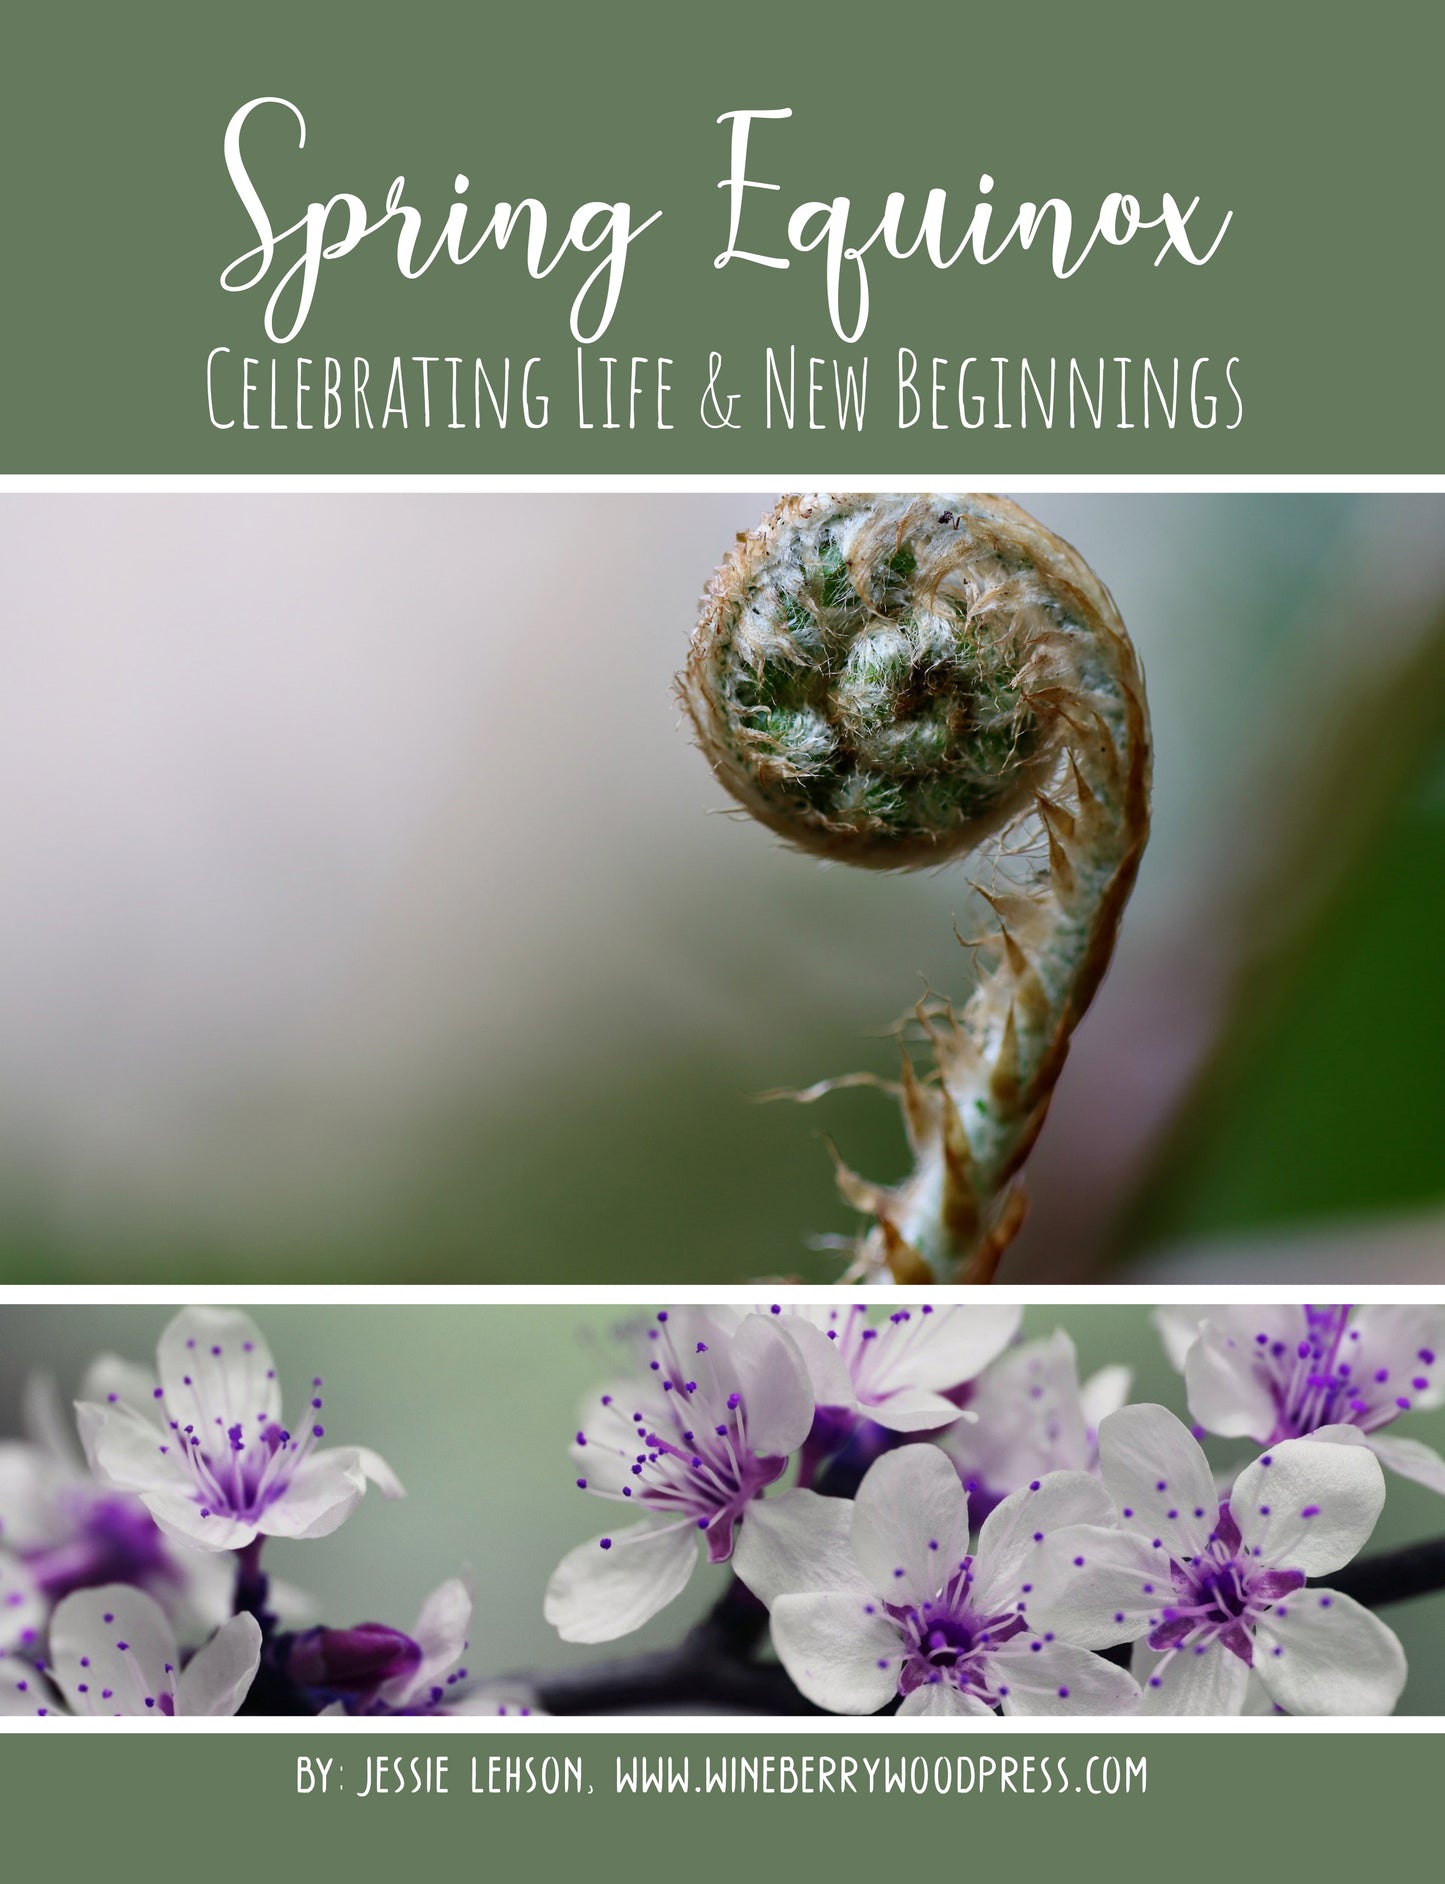 Spring Equinox: Celebrating Life & New Beginnings by Wineberry Wood Press